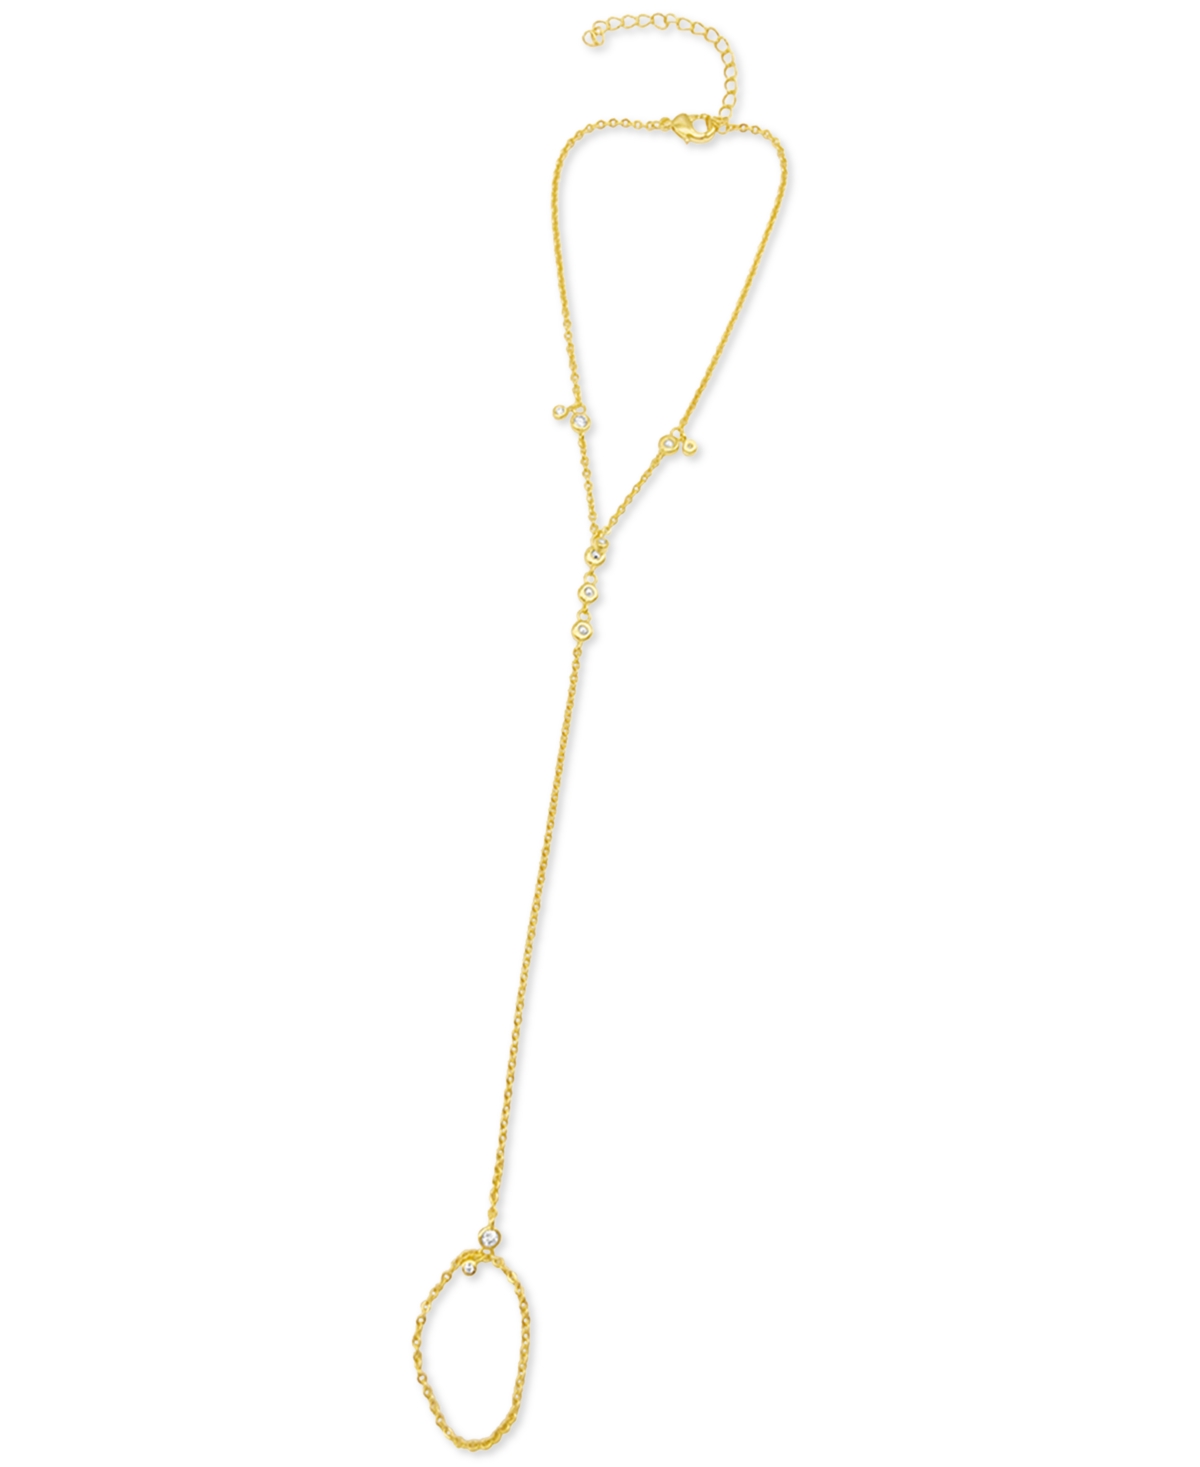 14k Gold-Plated Adjustable Hand Chain - Gold